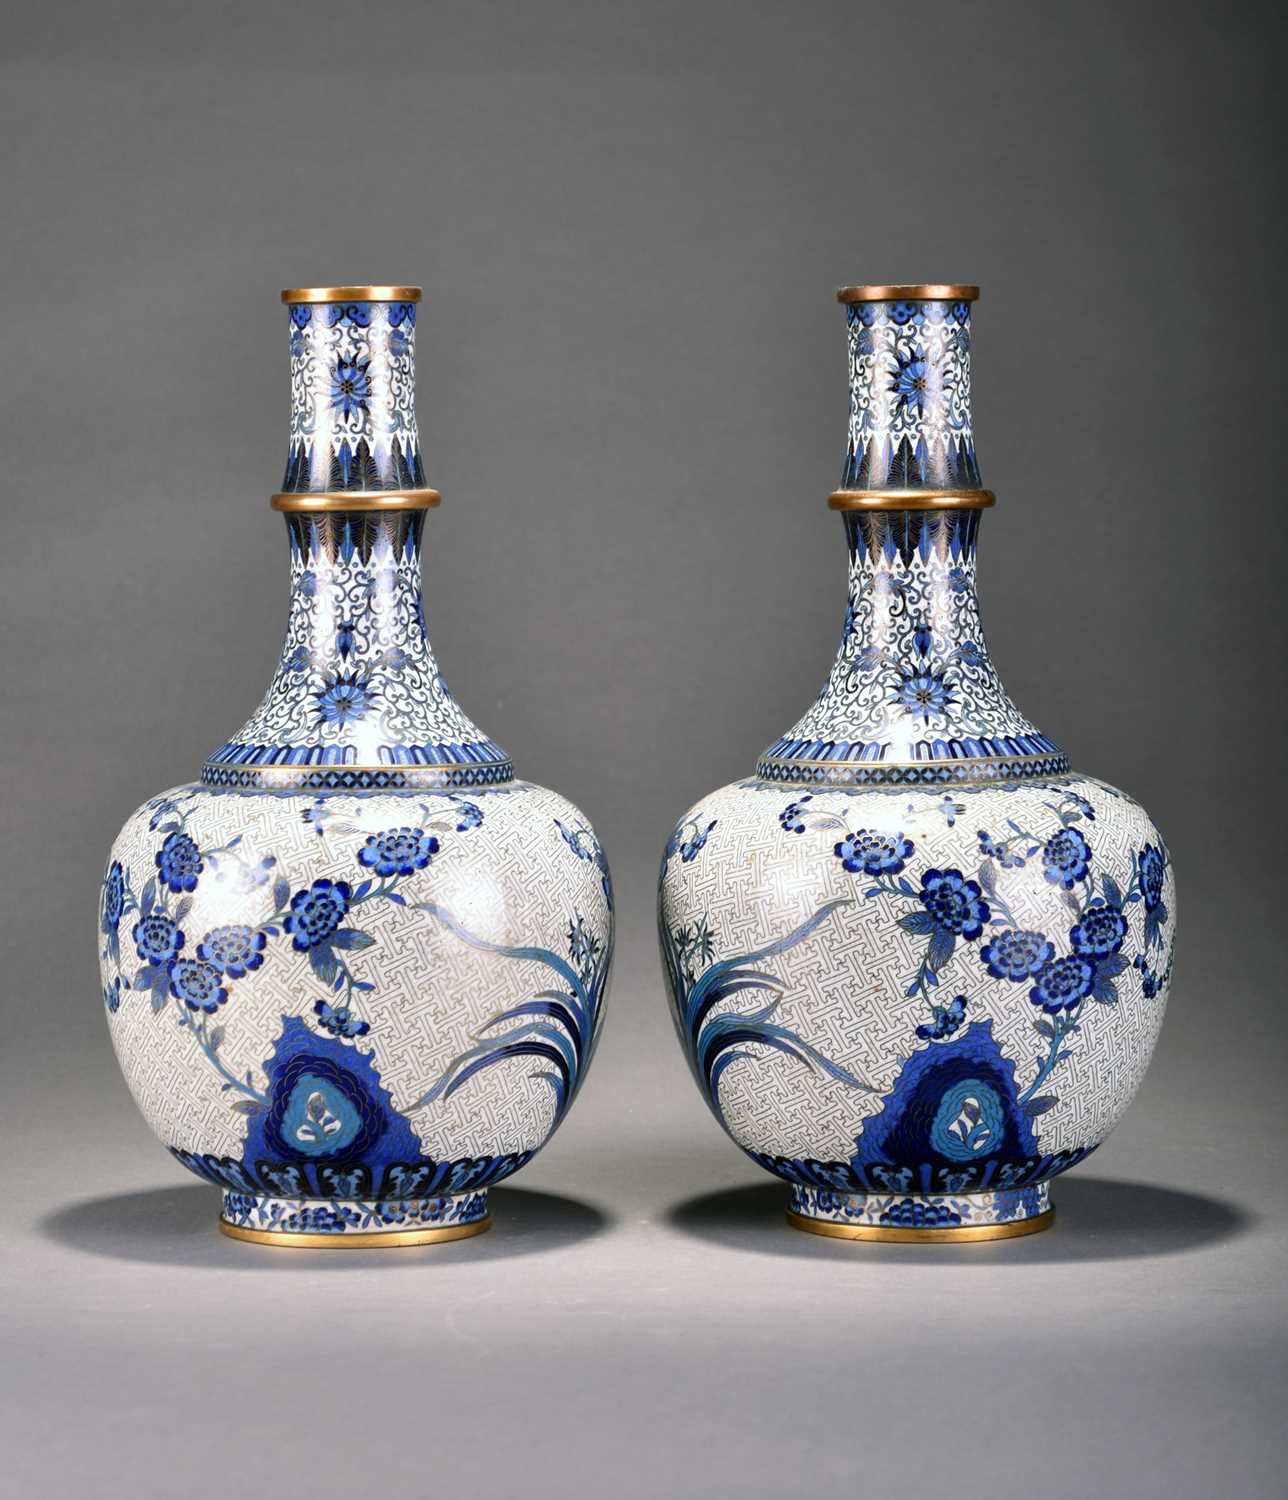 317 - A pair of Chinese cloisonne vases, Qing Dynasty